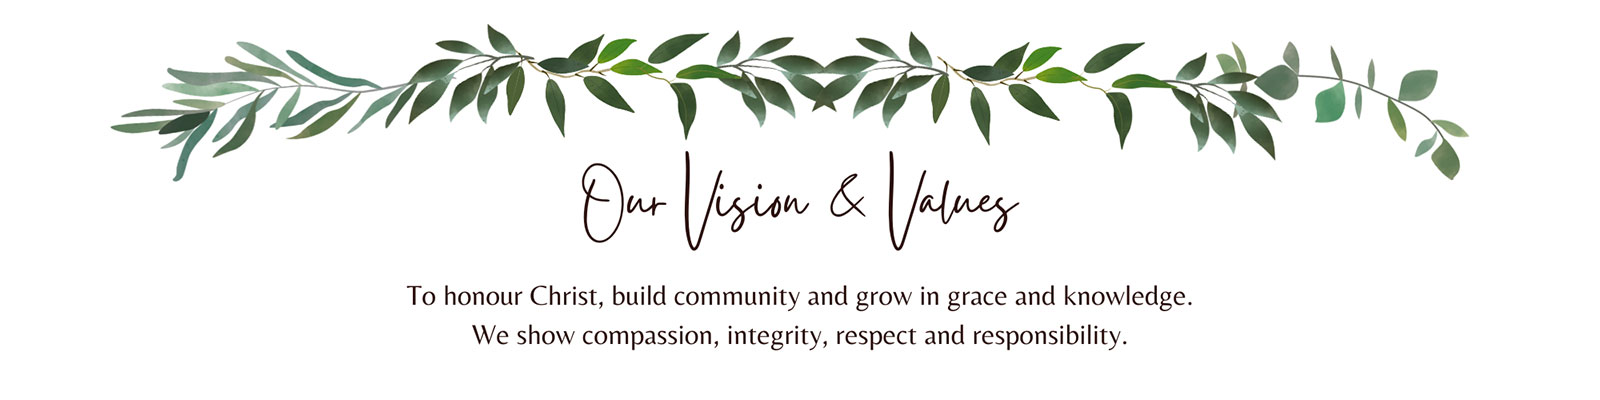 Our Vision And Values Statement